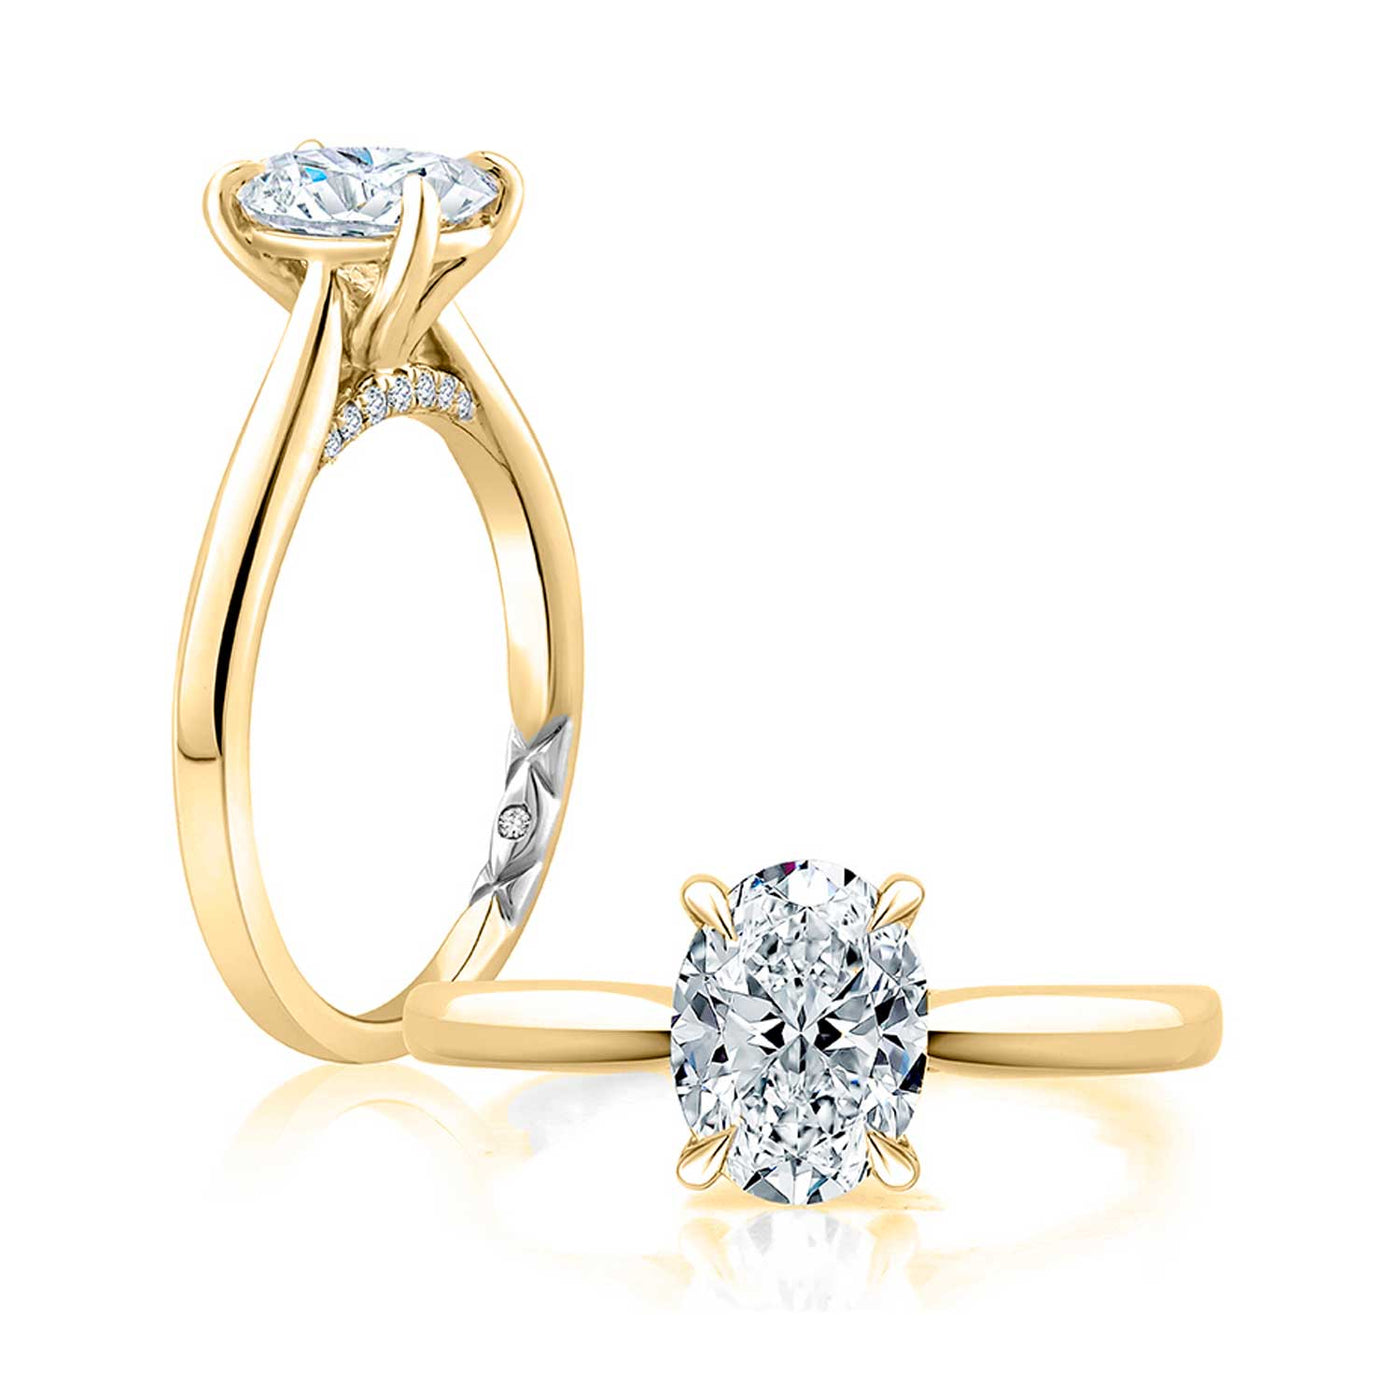 14k Yellow Gold Round Solitaire Diamond Semi-Mount Engagement Ring – MECOV2543/208